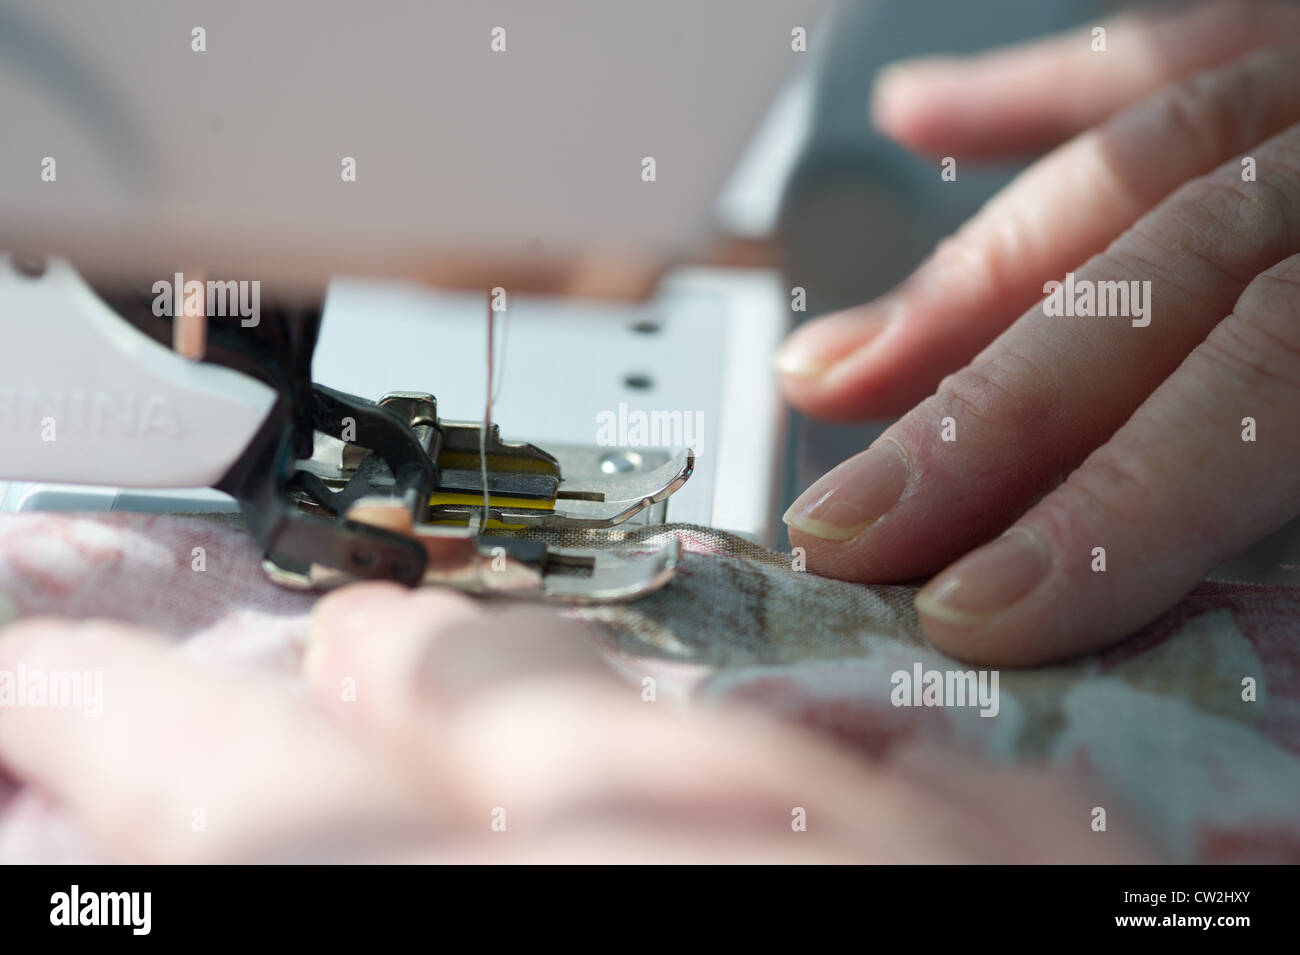 Hands moving fabric through sewing machine  Stock Photo